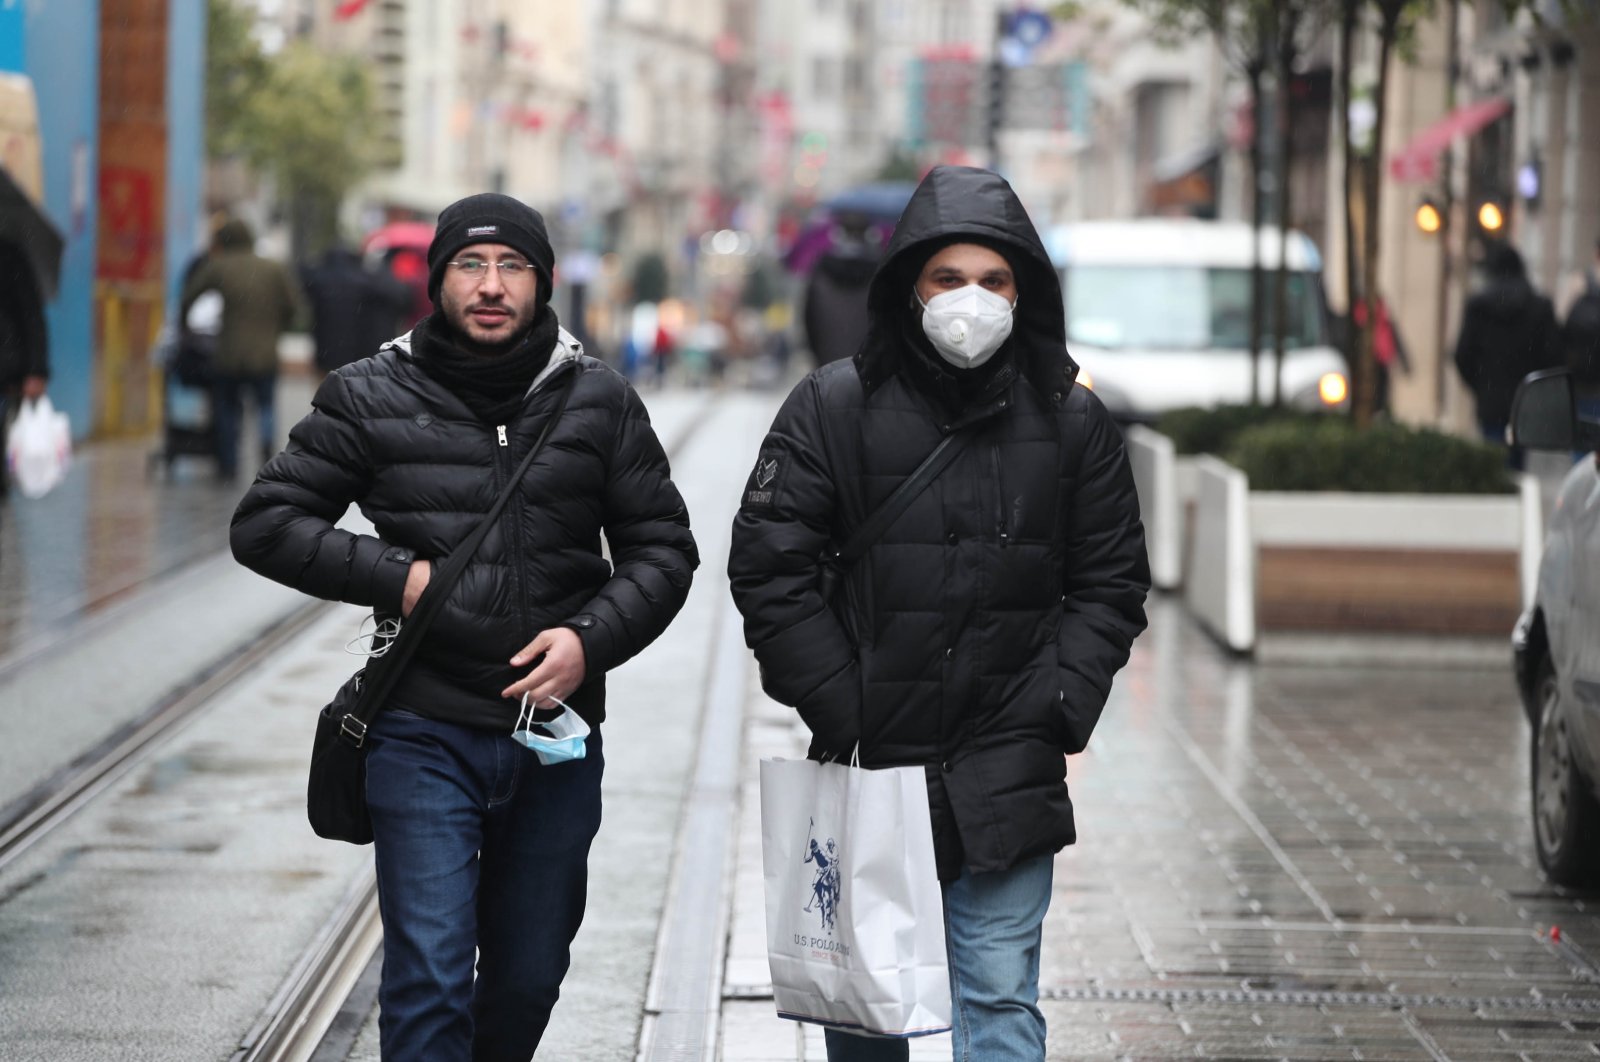 People with and without protective masks against COVID-19 walk on Istiklal Avenue, in Istanbul, Turkey, March 3, 2022. (DHA Photo)